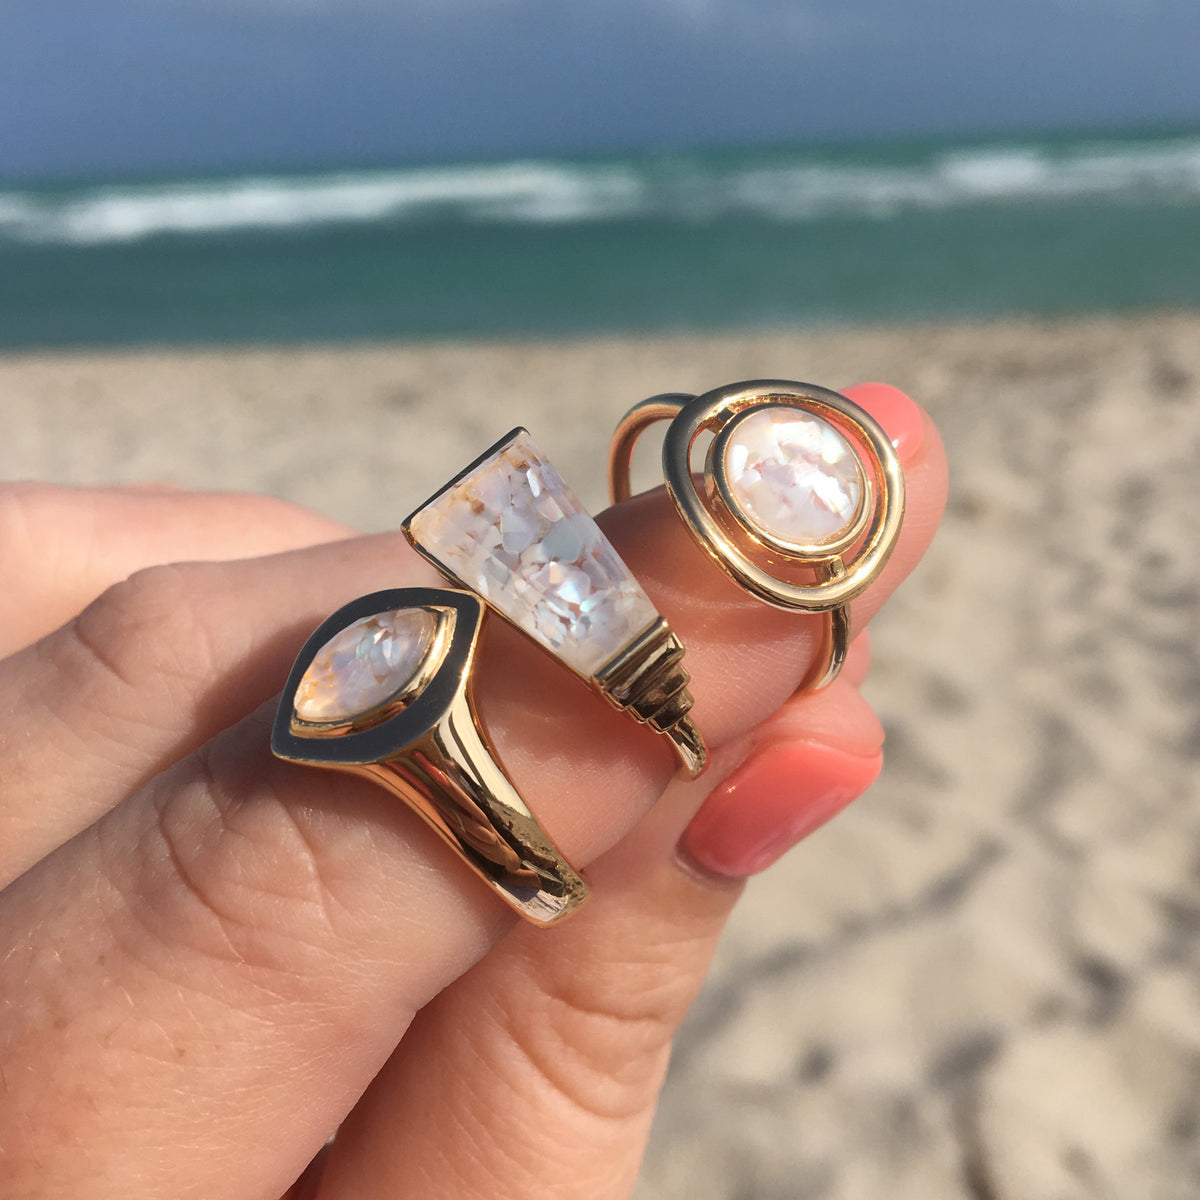 Delano Ring - Mother of Pearl